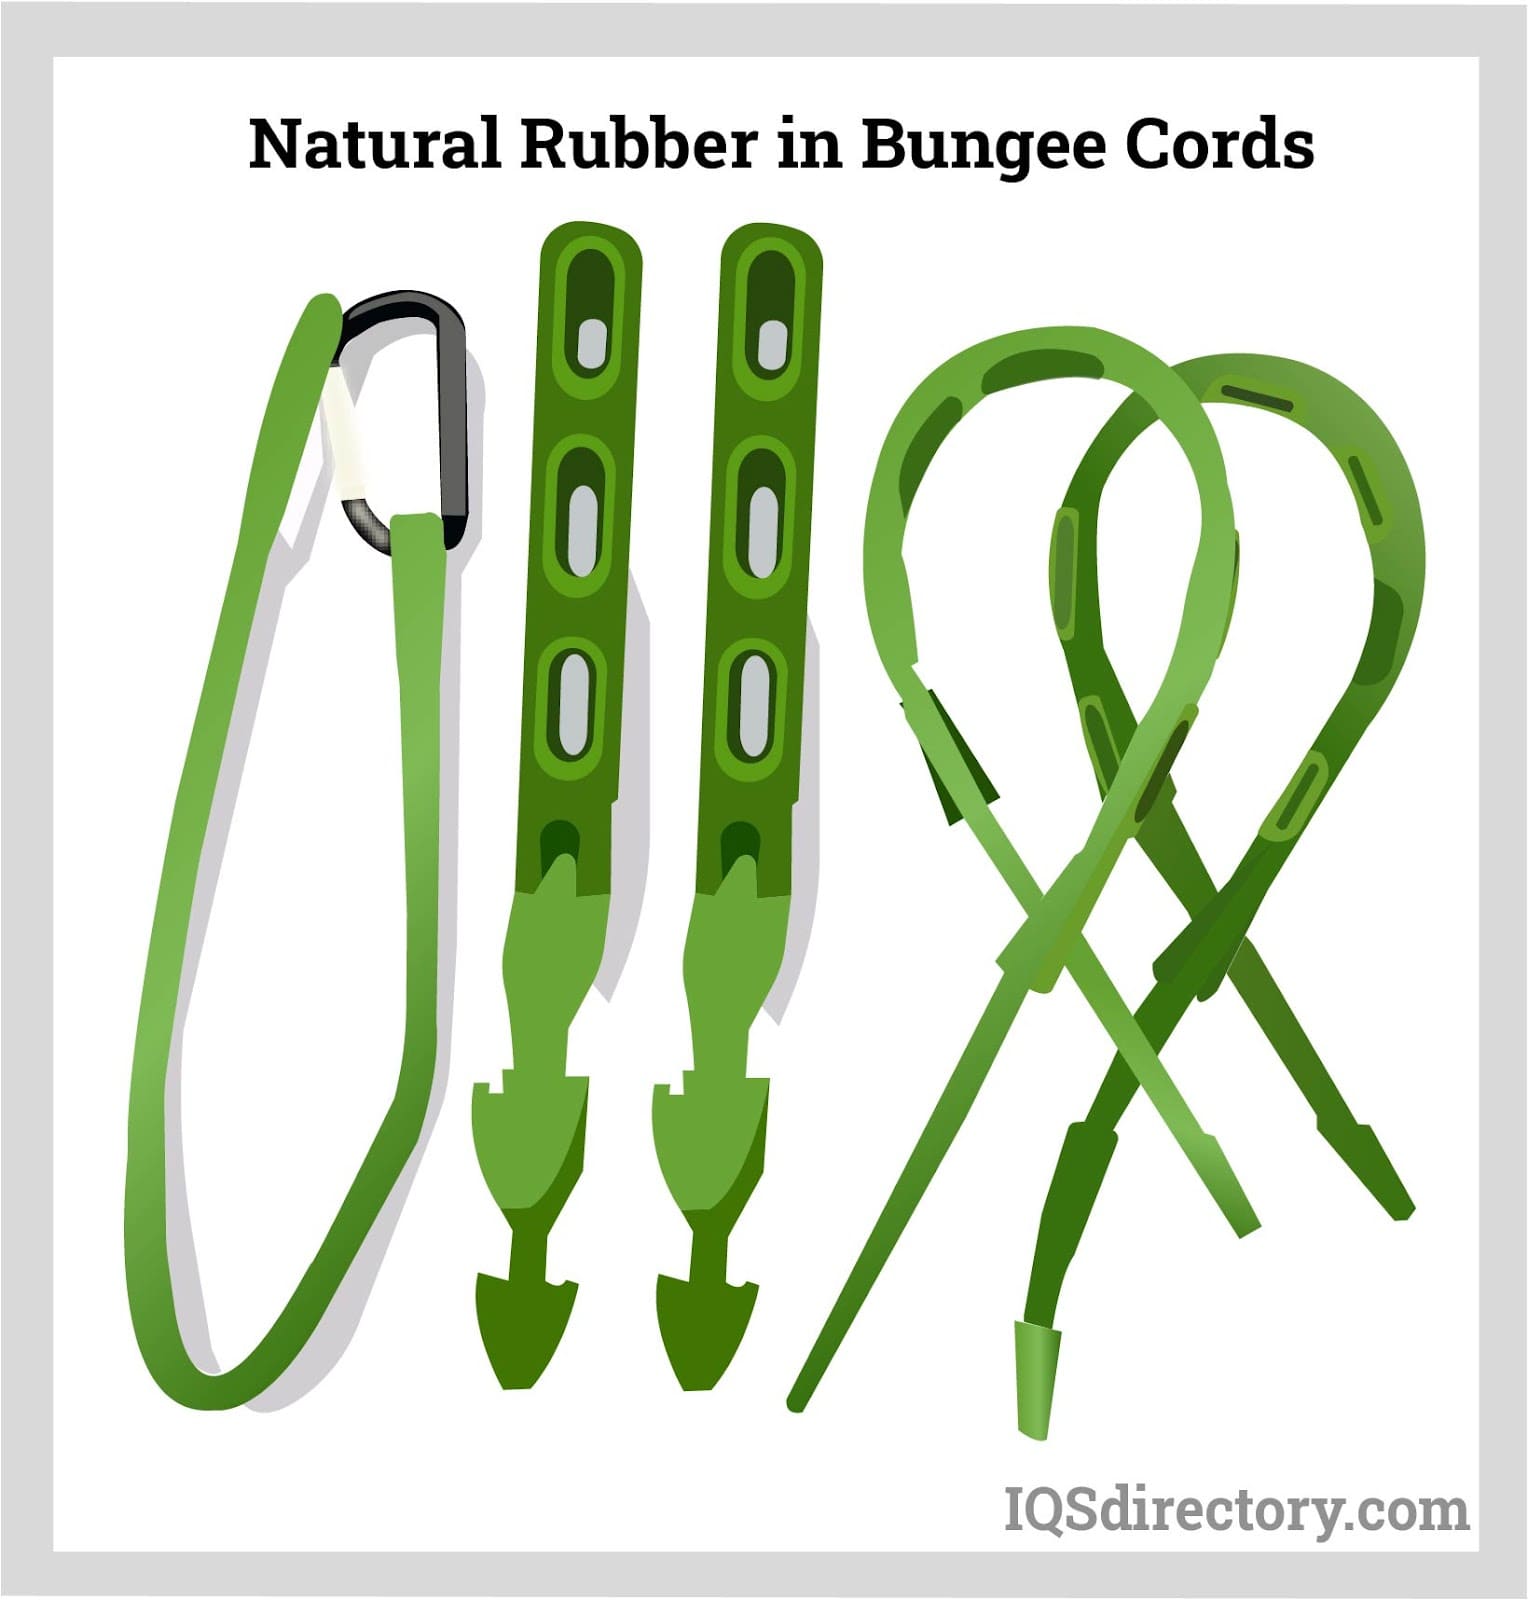 Your Choice of Bungee Straps Matter to Secure the Loads